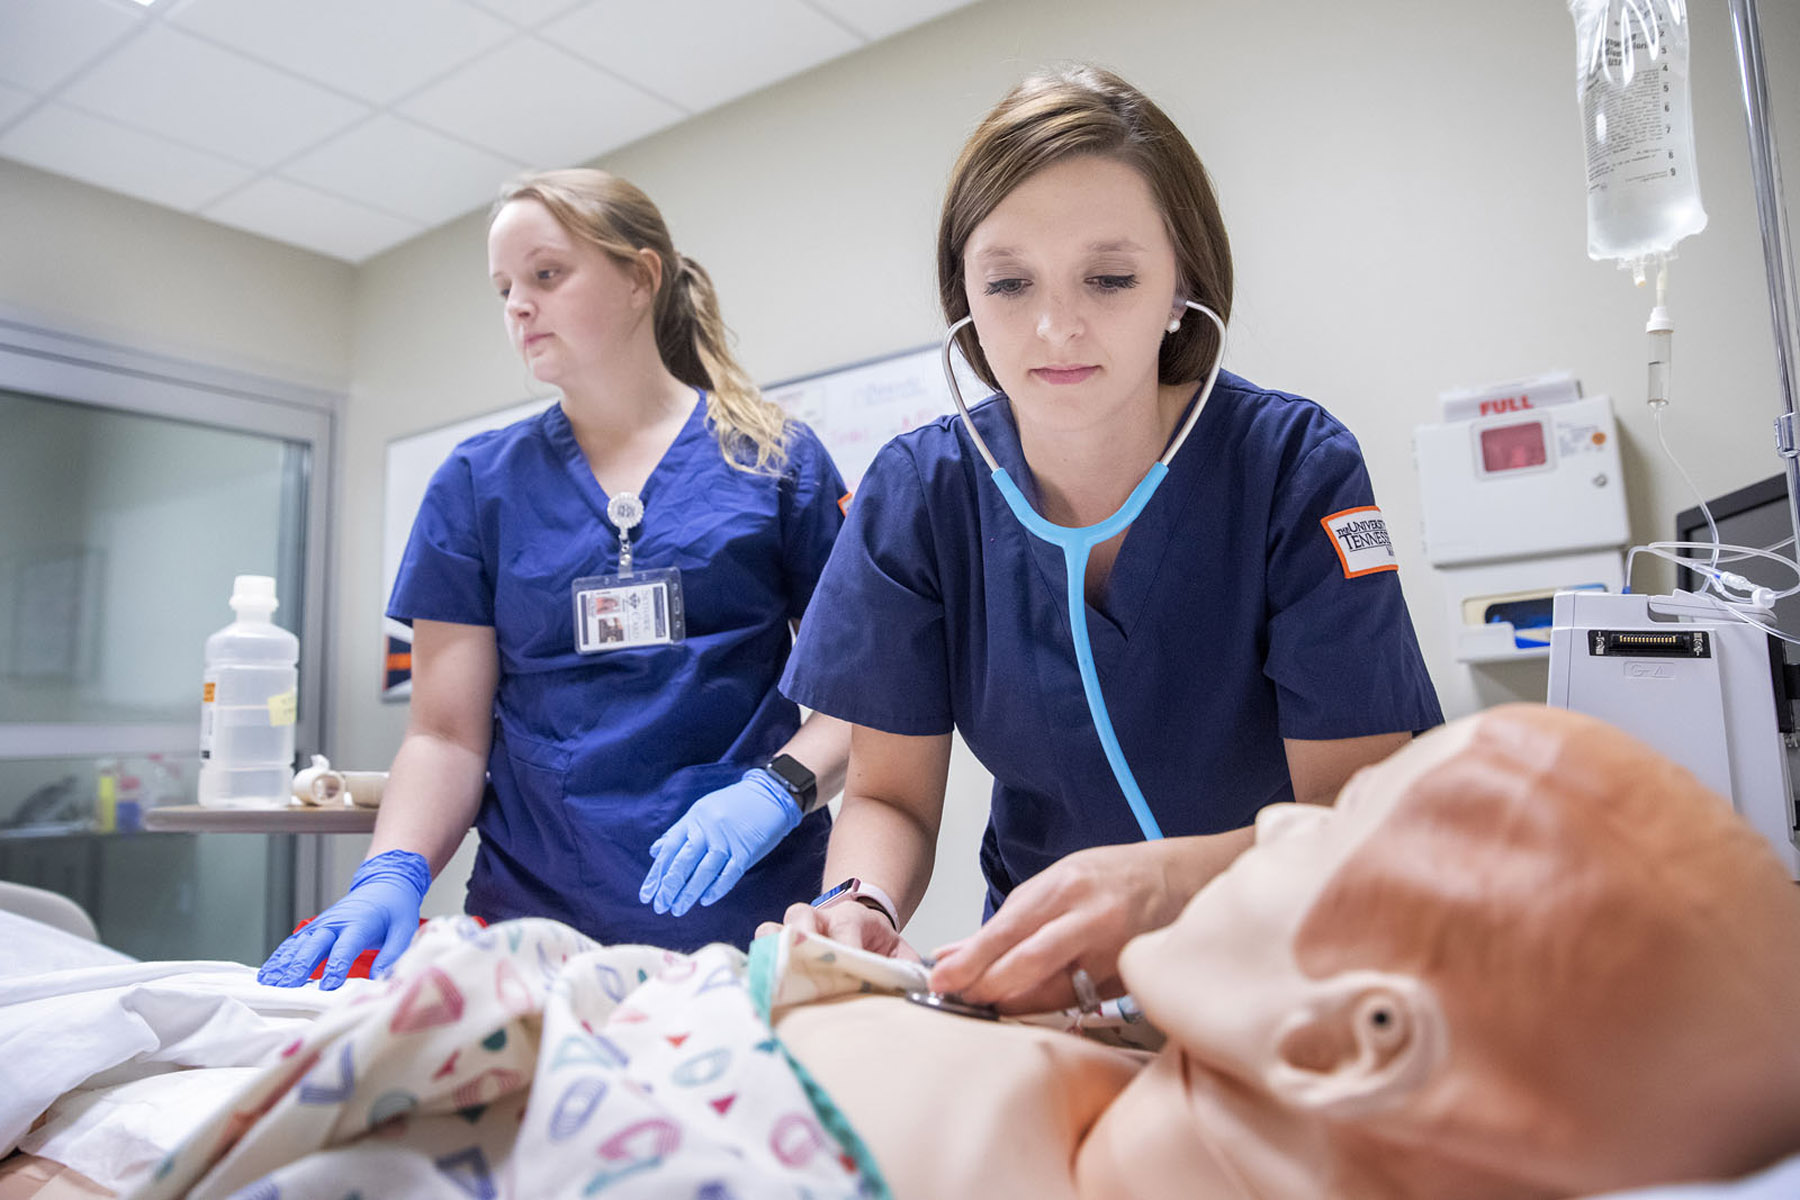 UT Martin's Department of Nursing has a fully operational simulation lab to enhance your education through beginning, intermediate and advanced levels of study.